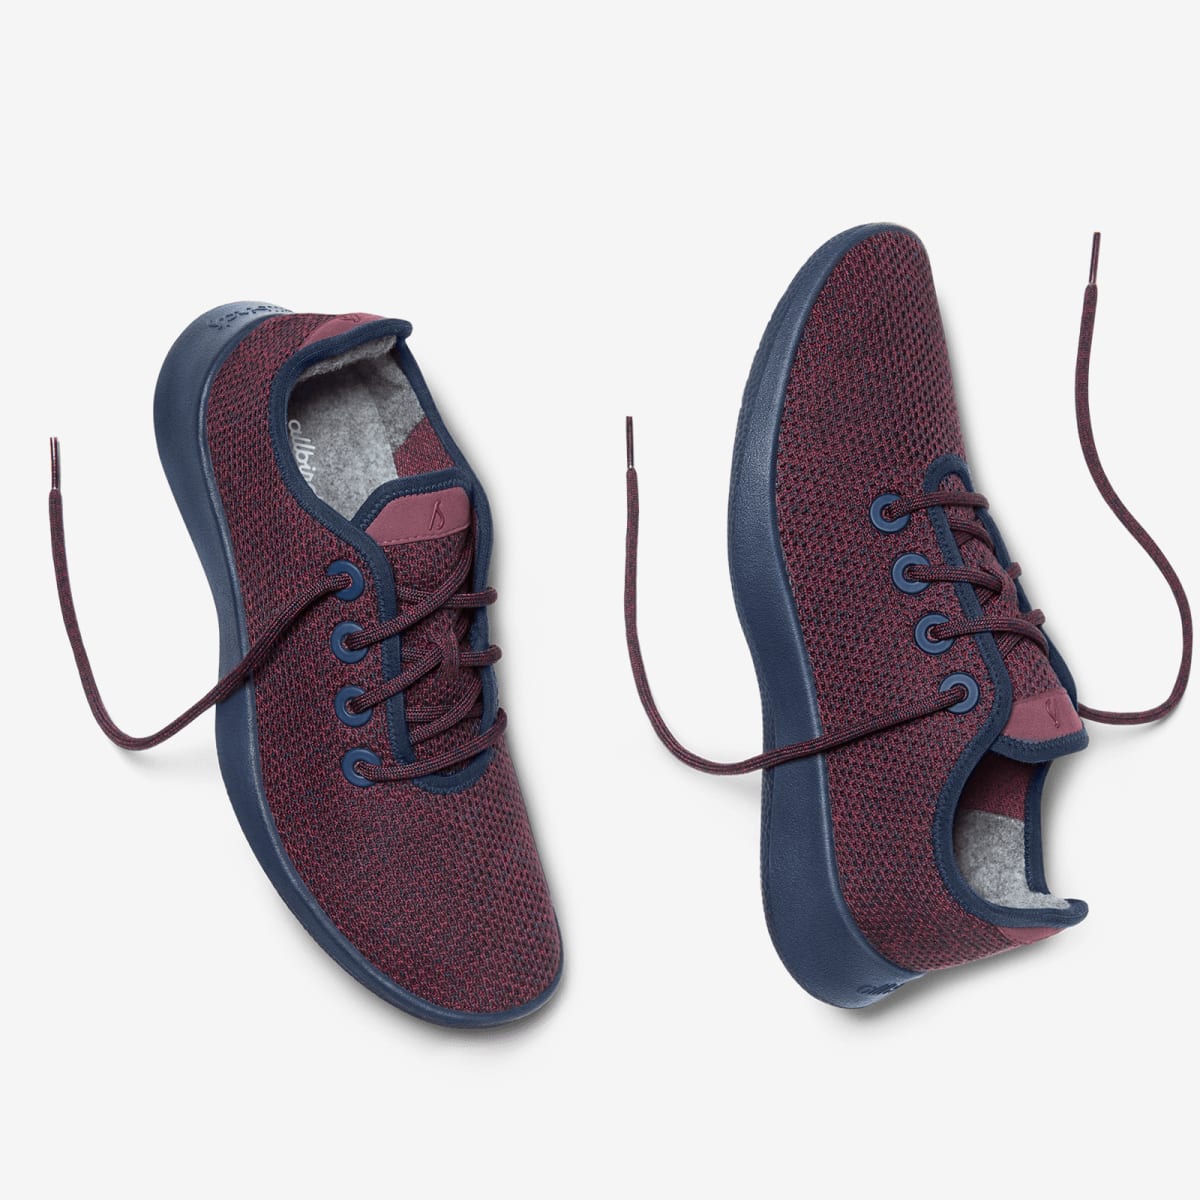 Allbirds Shoes - Women's Tree Runners Shoes - LIMITED EDITION: Olympus (Marine Sole)